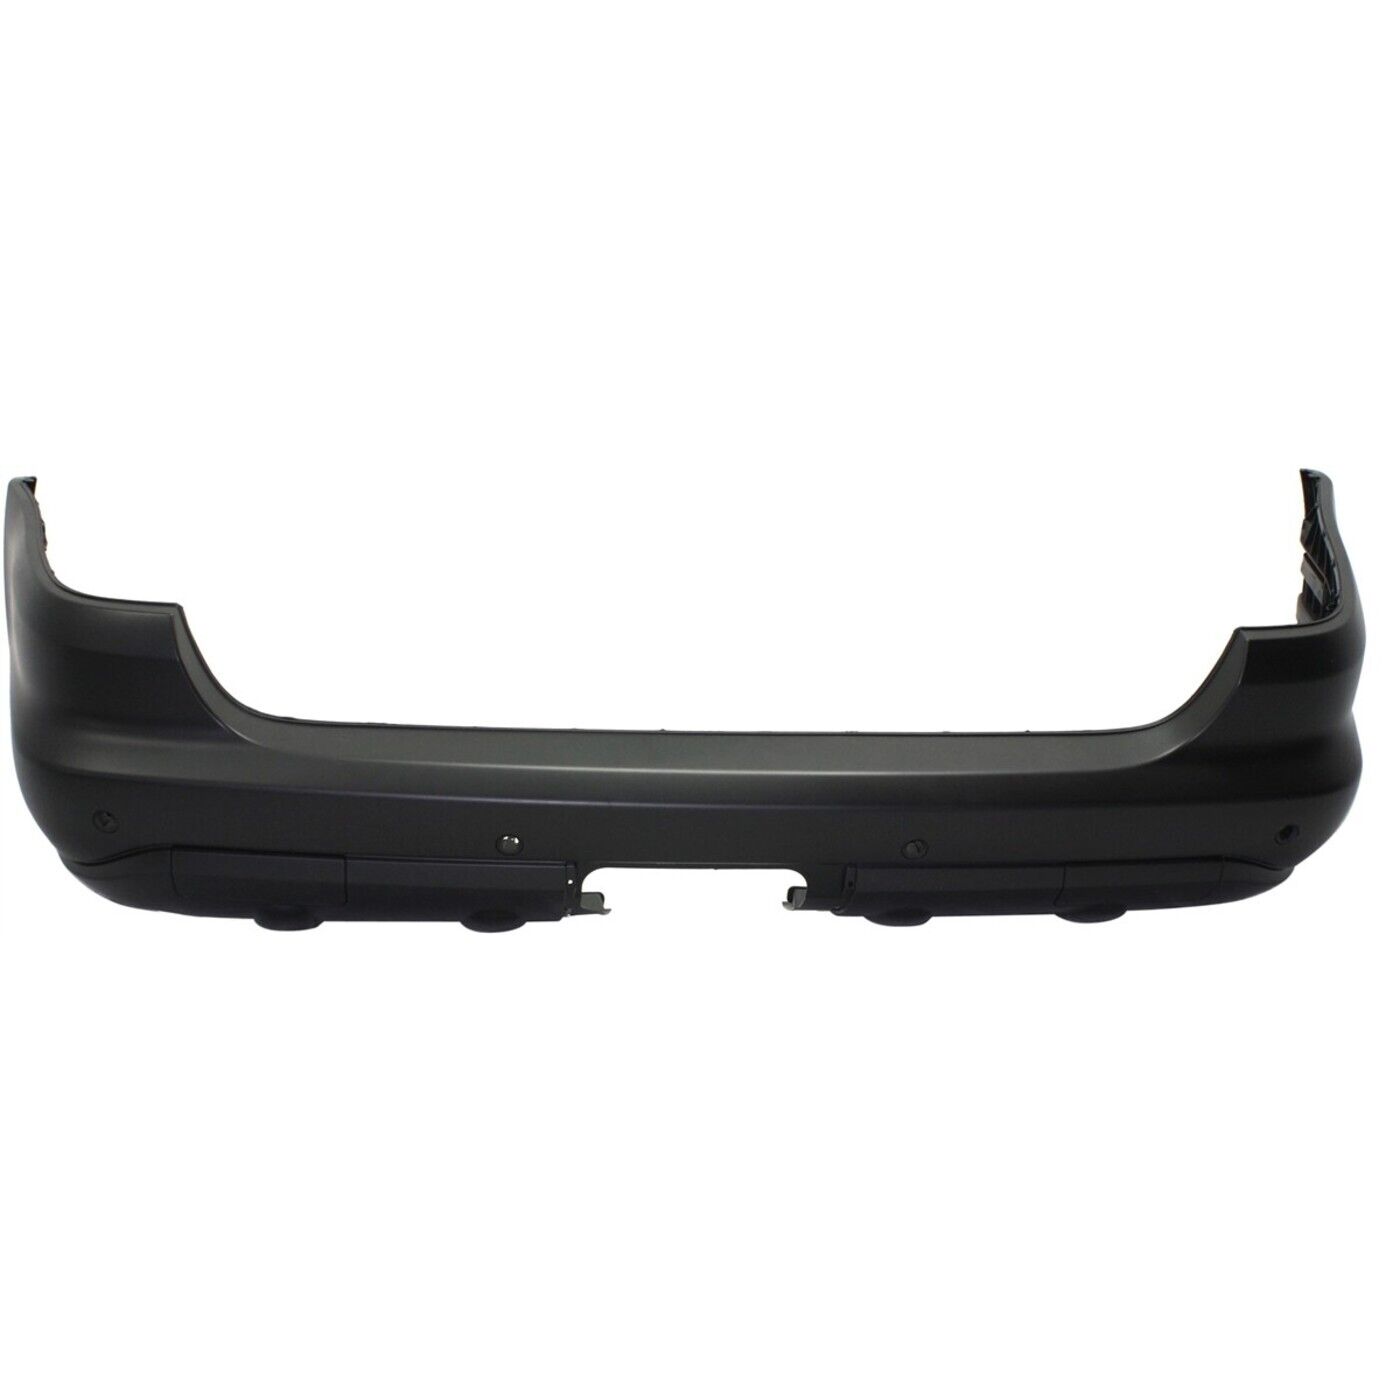 Rear Bumper Cover For 03-05 Mercedes Benz ML350 02-03 ML320 With Tow Hook Hole